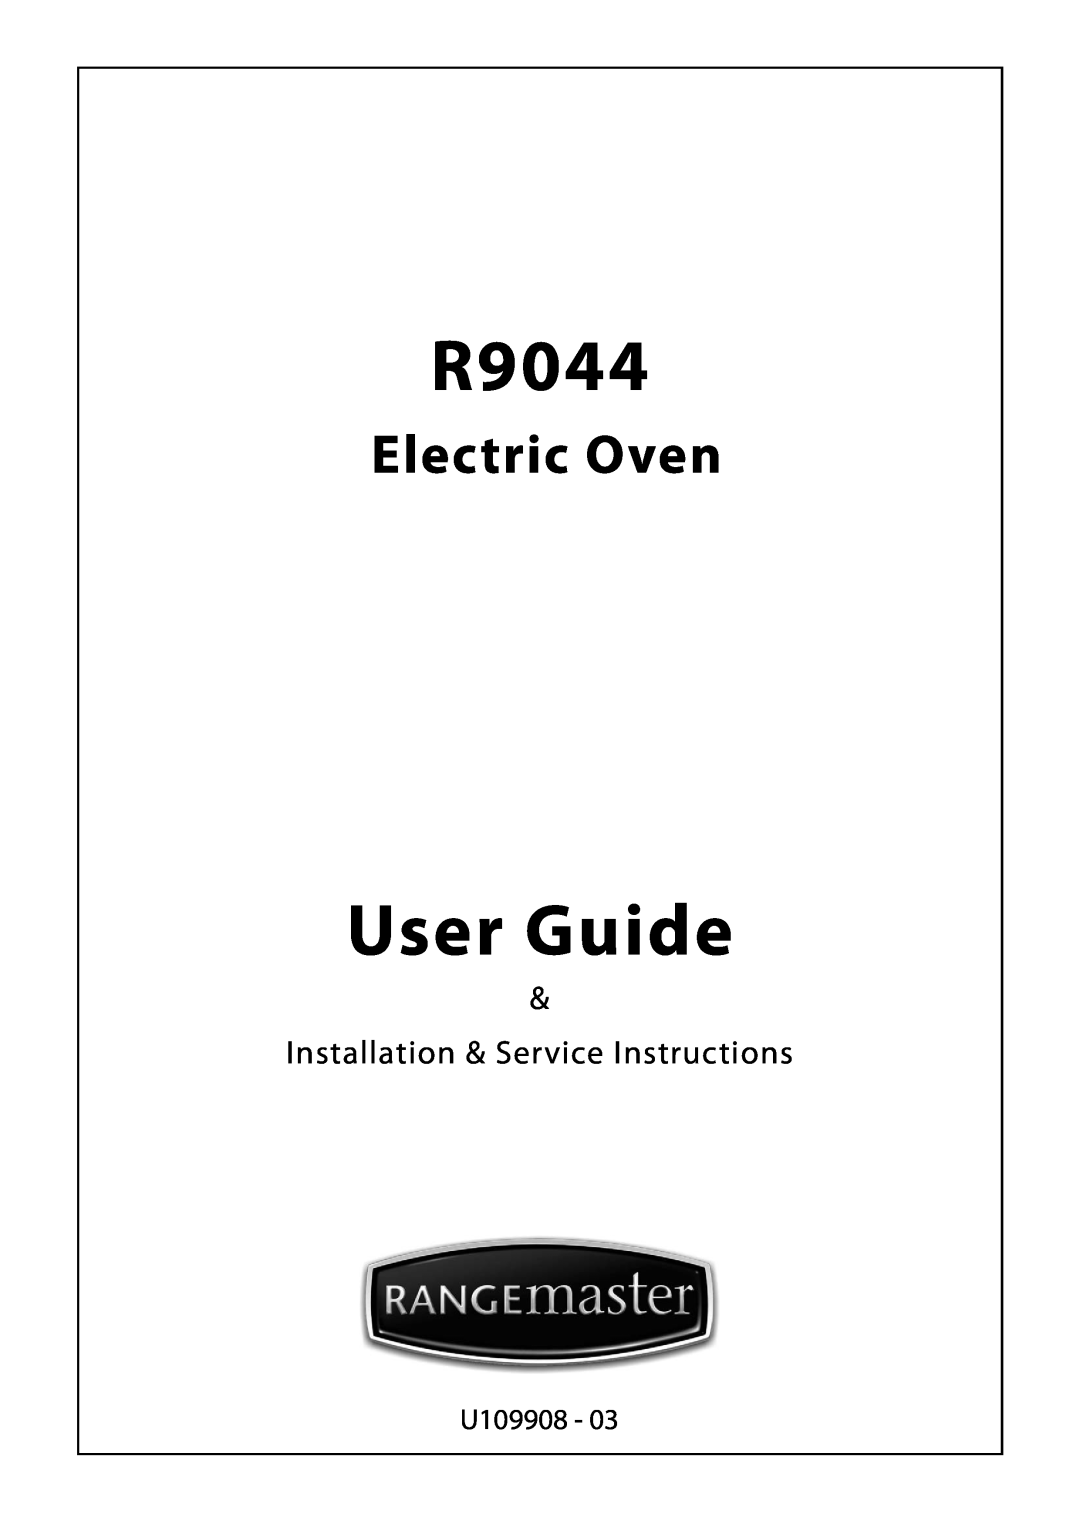 Rangemaster R9044 manual User Guide, Electric Oven, Installation & Service Instructions, U109908 